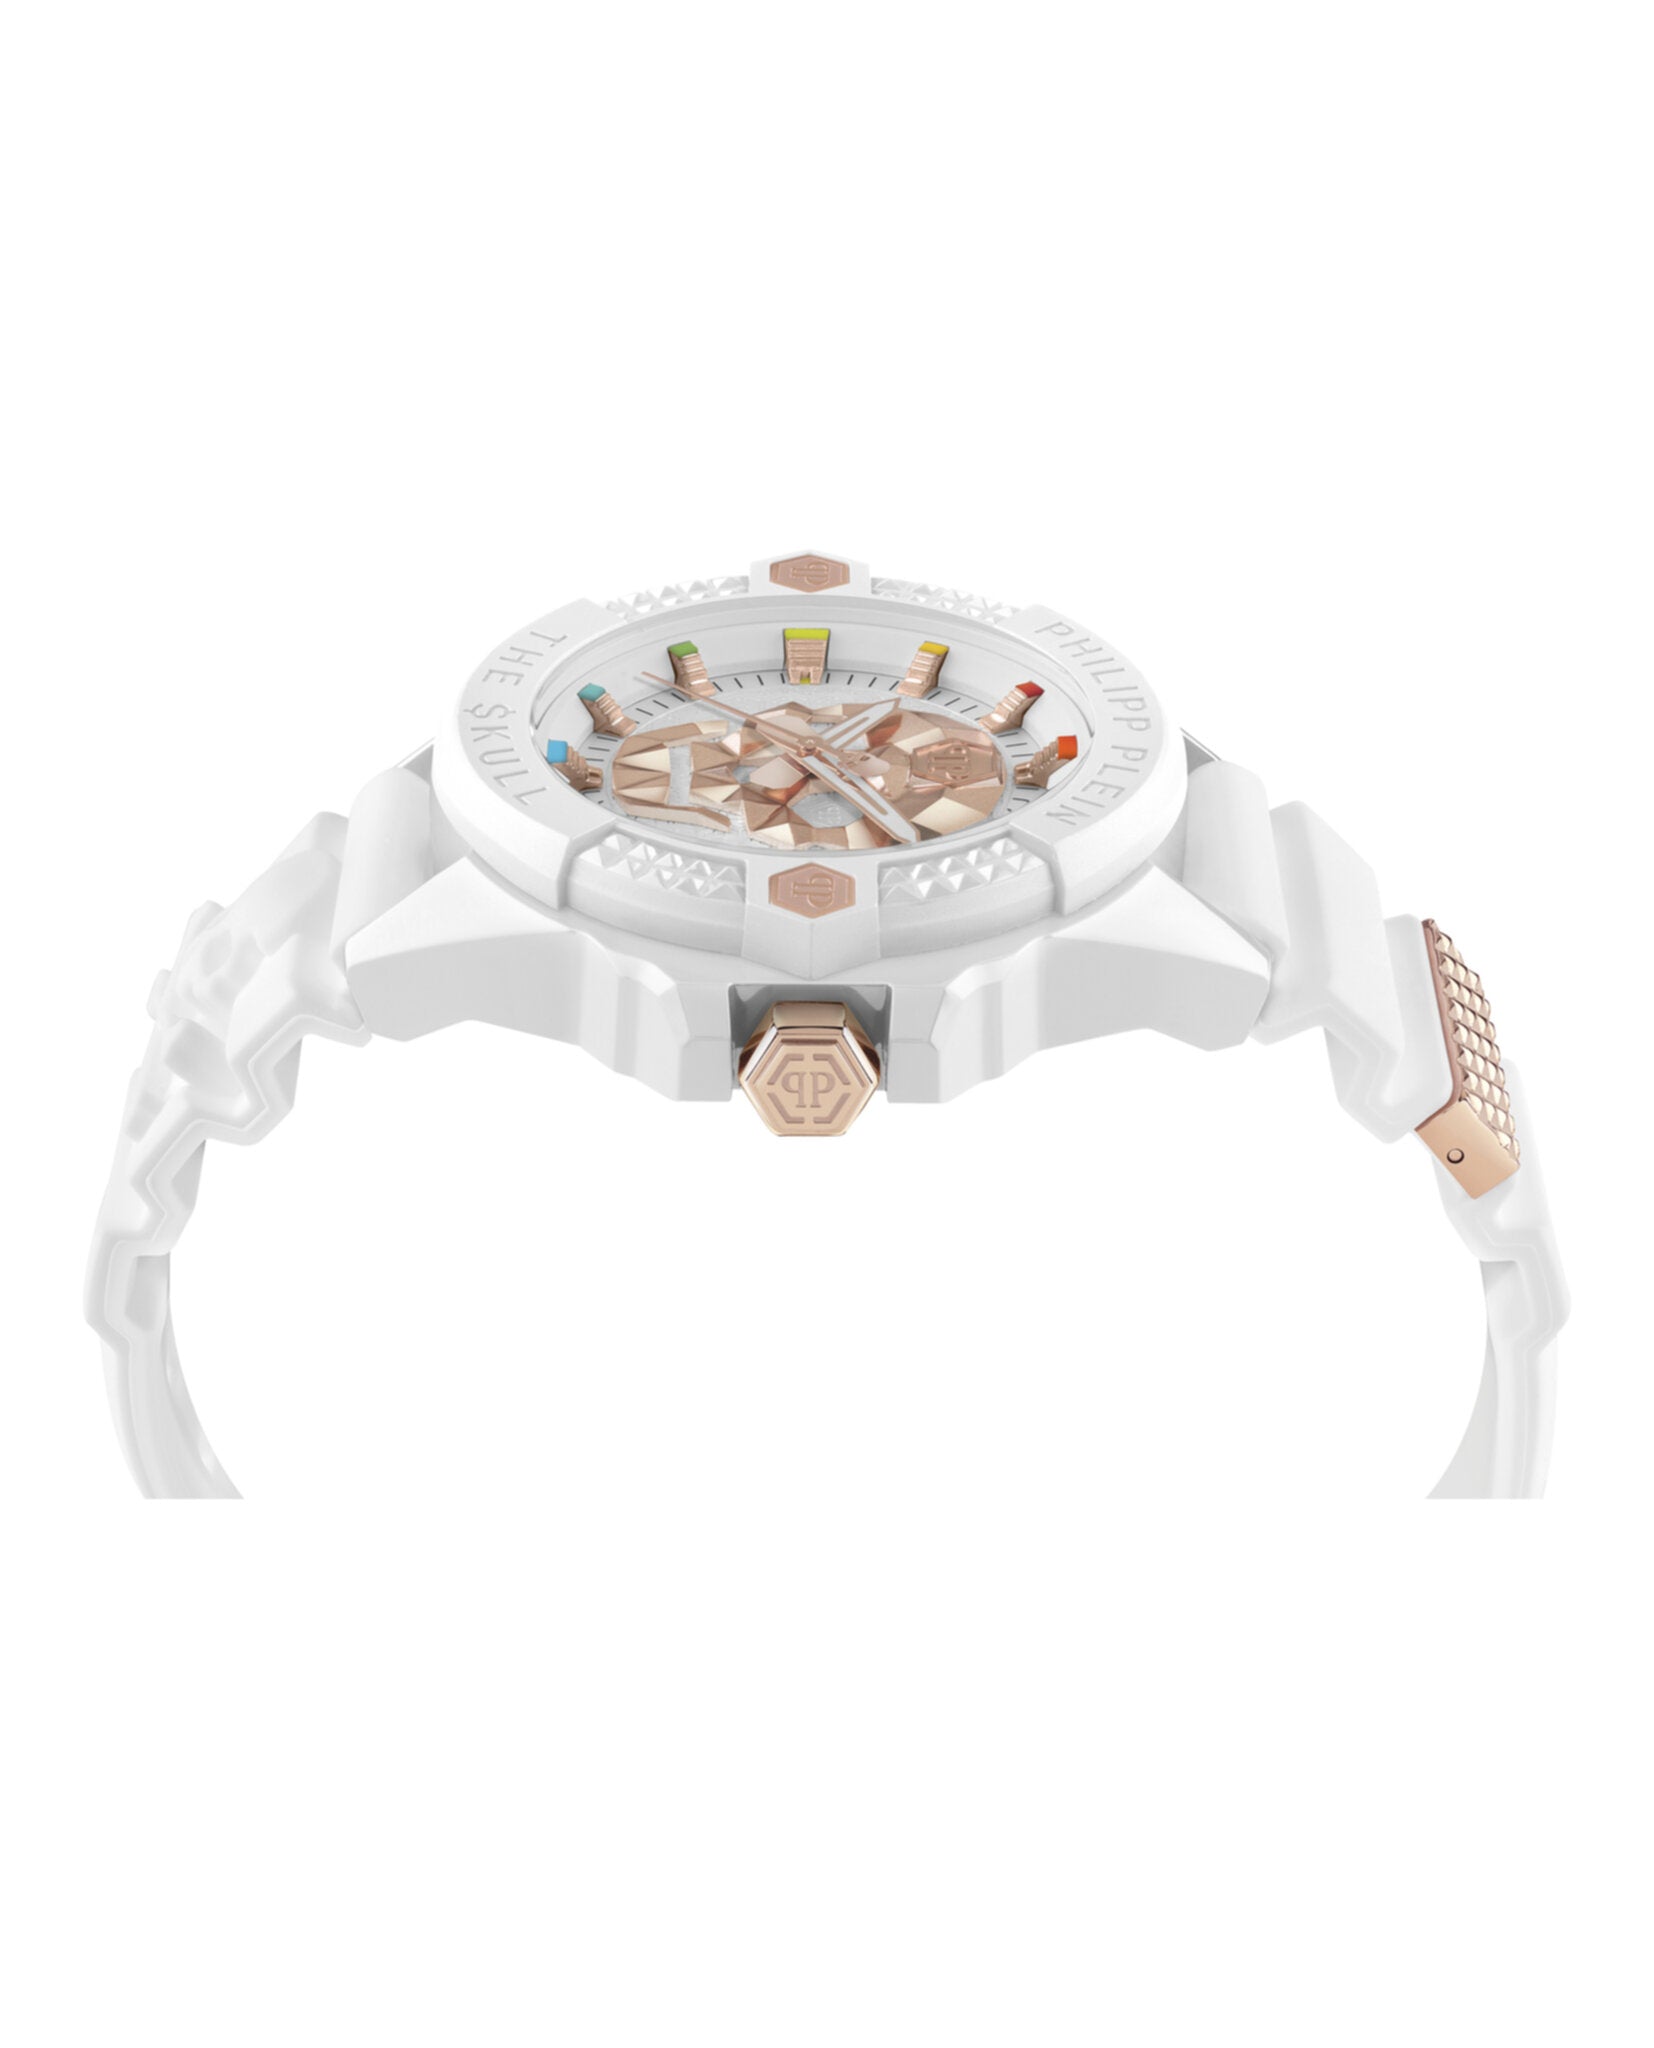 The $kull Ecoceramic Silicone Watch